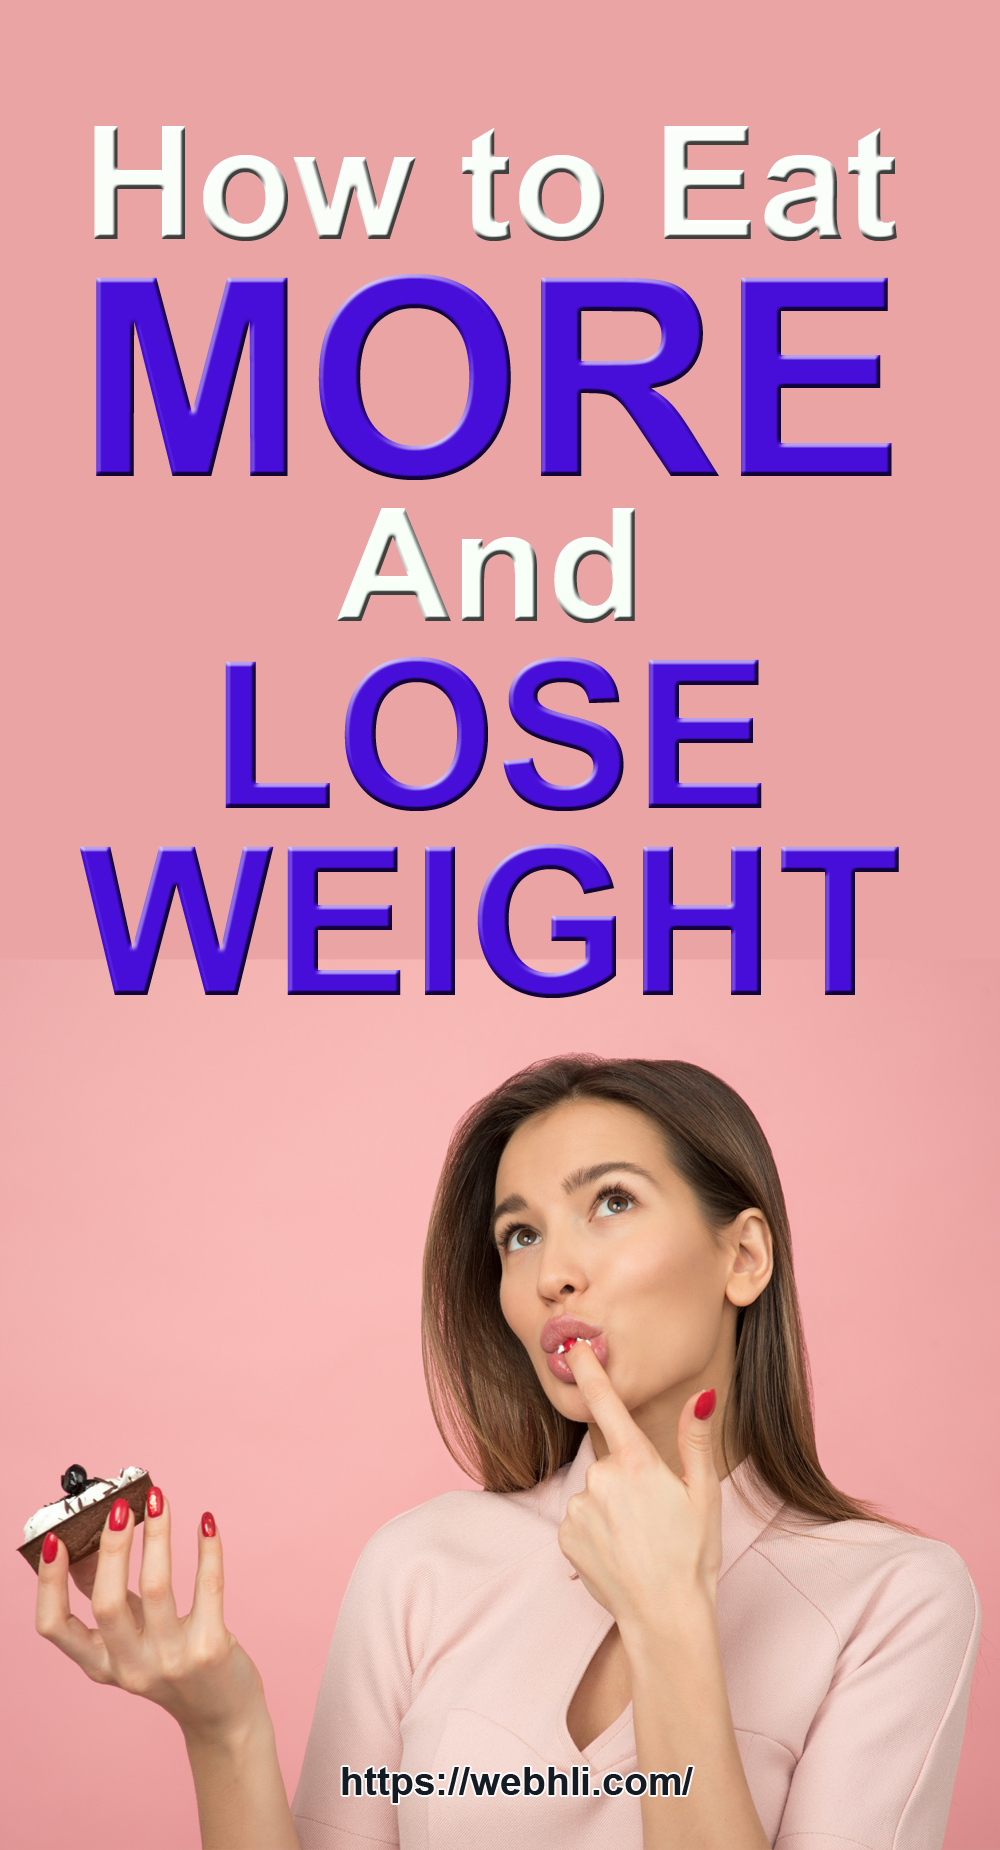 How To Eat More And Lose Weight Healthy Lifestyle 7904